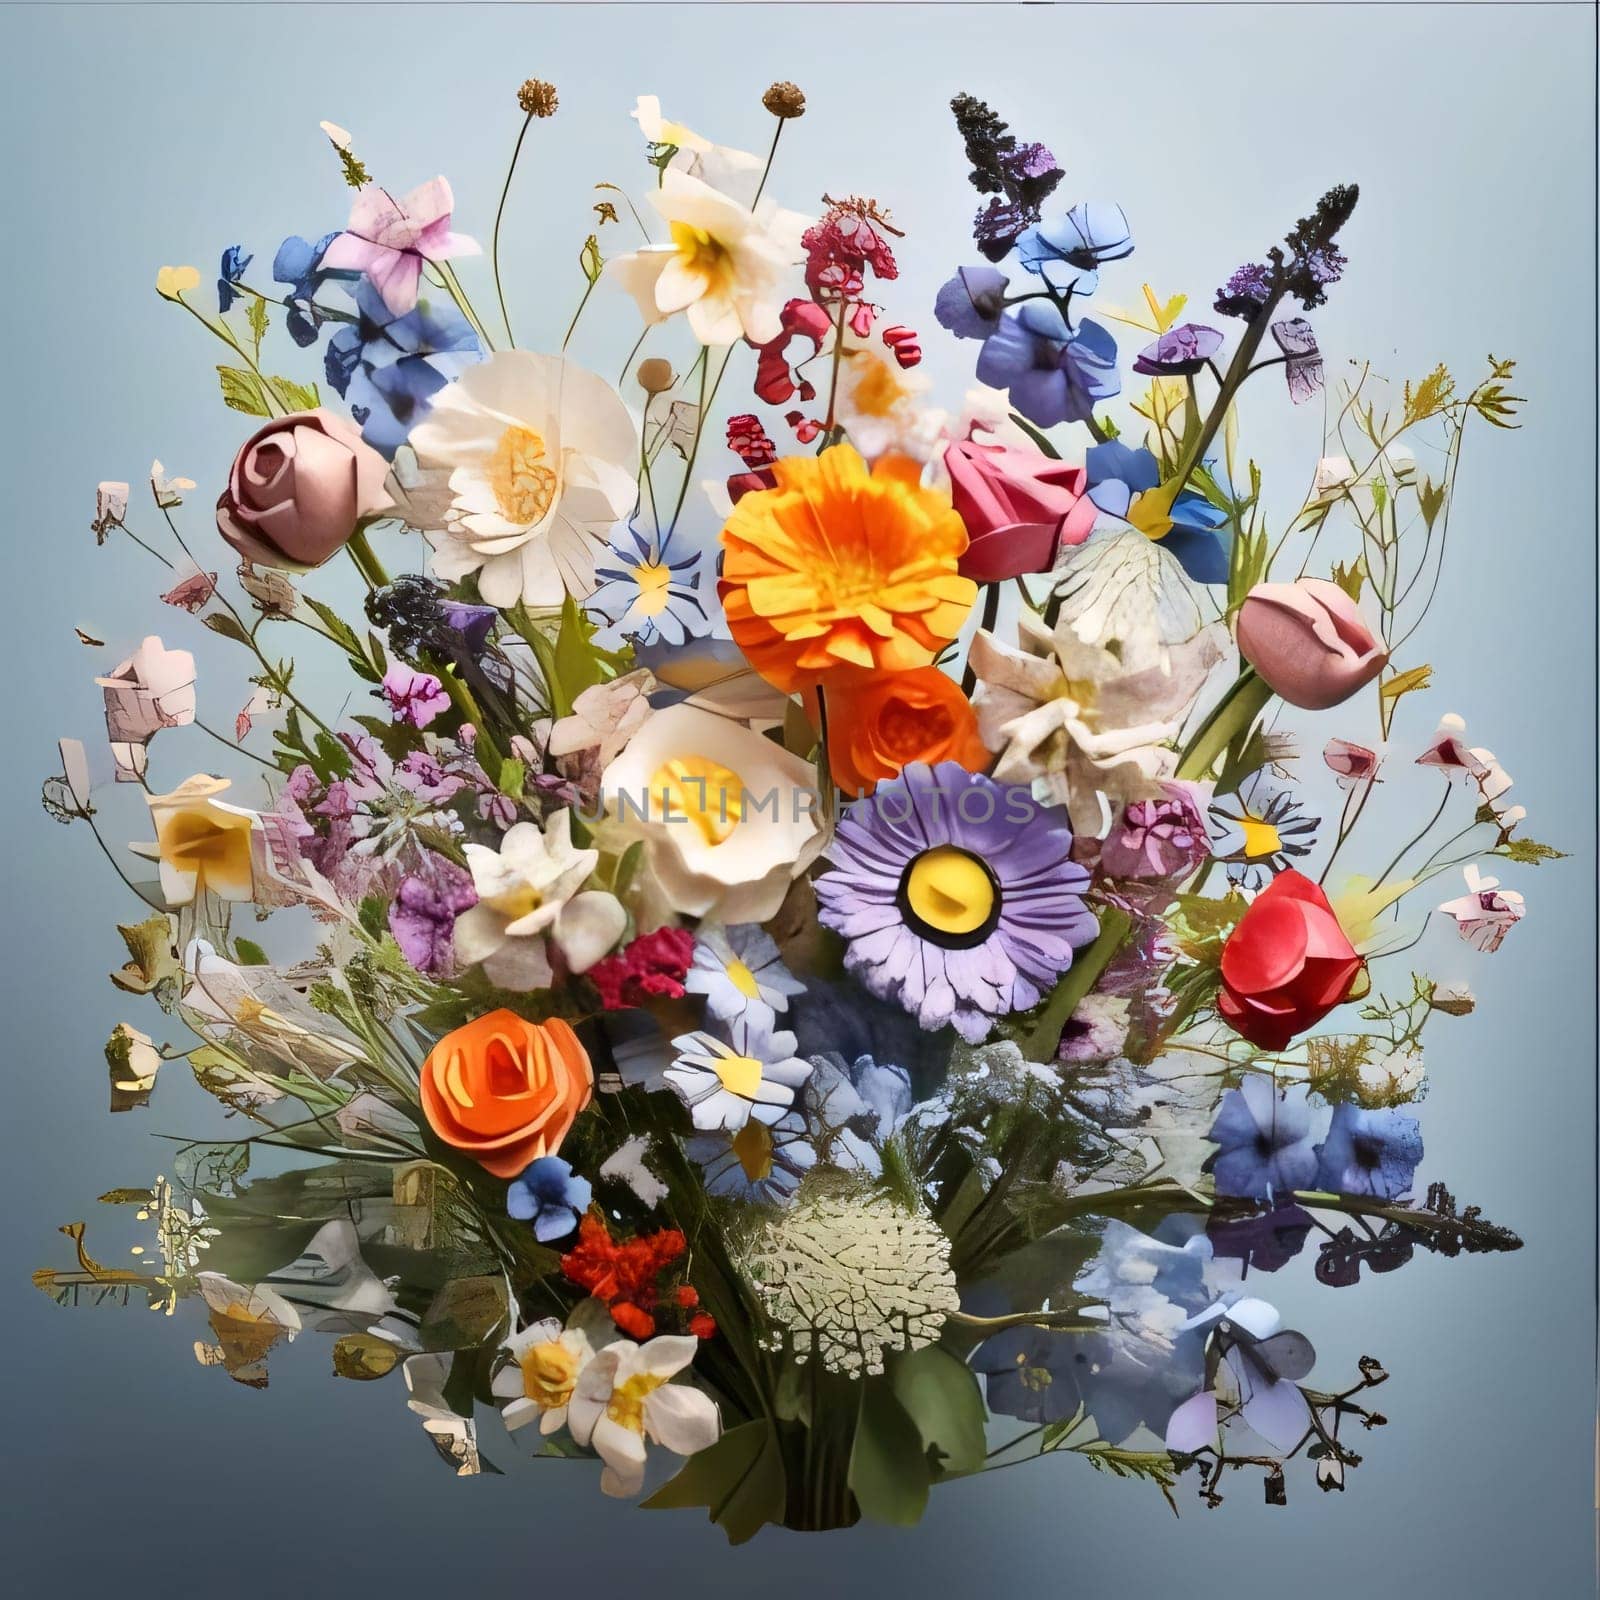 Bouquet of colorful flowers, different species in a vase. Flowering flowers, a symbol of spring, new life. A joyful time of nature waking up to life.